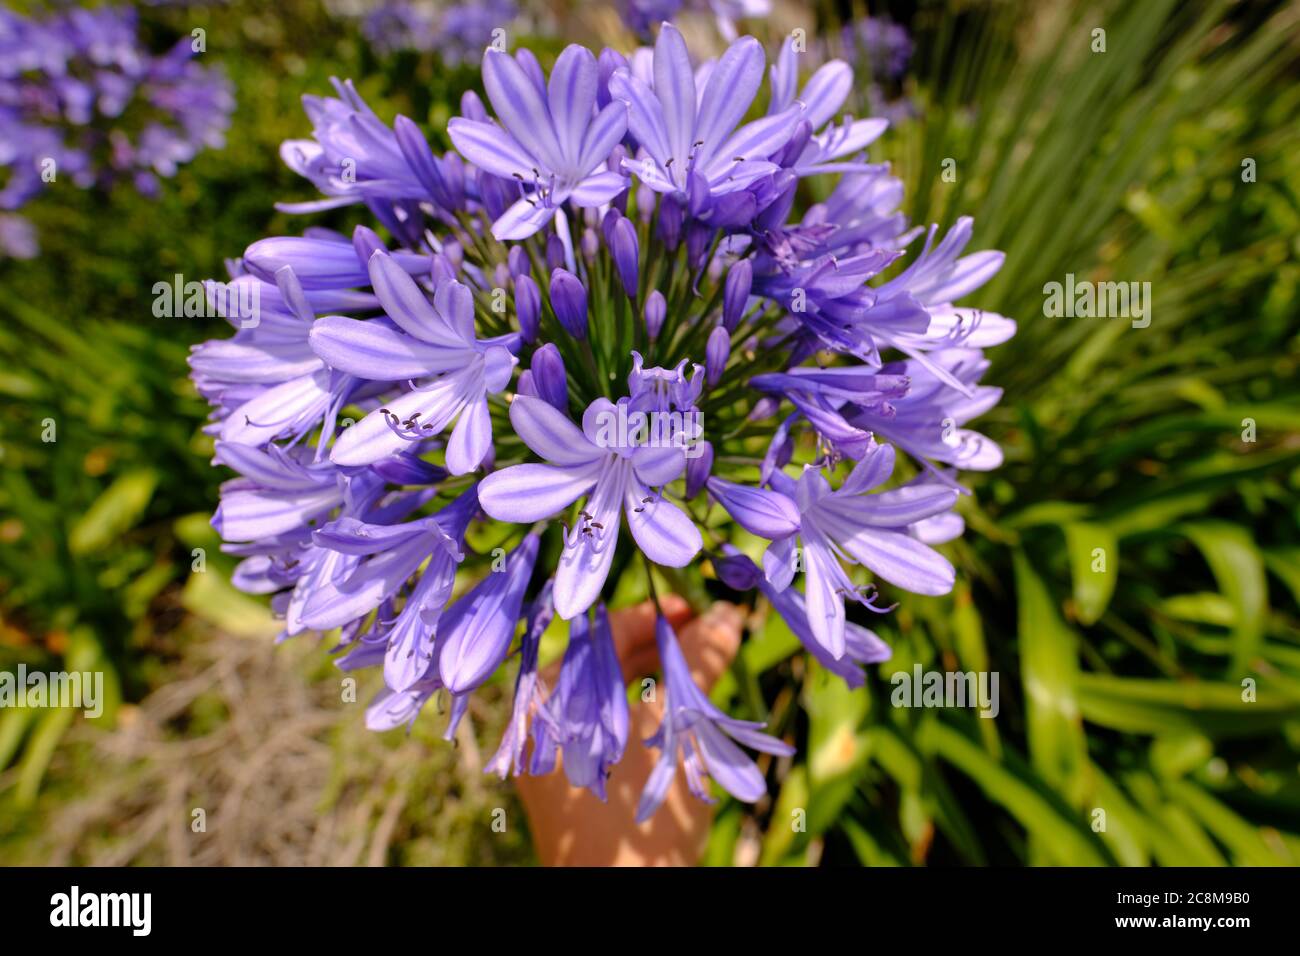 Close-up of blooming Agapanthus, commonly known as lily of the Nile, or African lily. Stock Photo